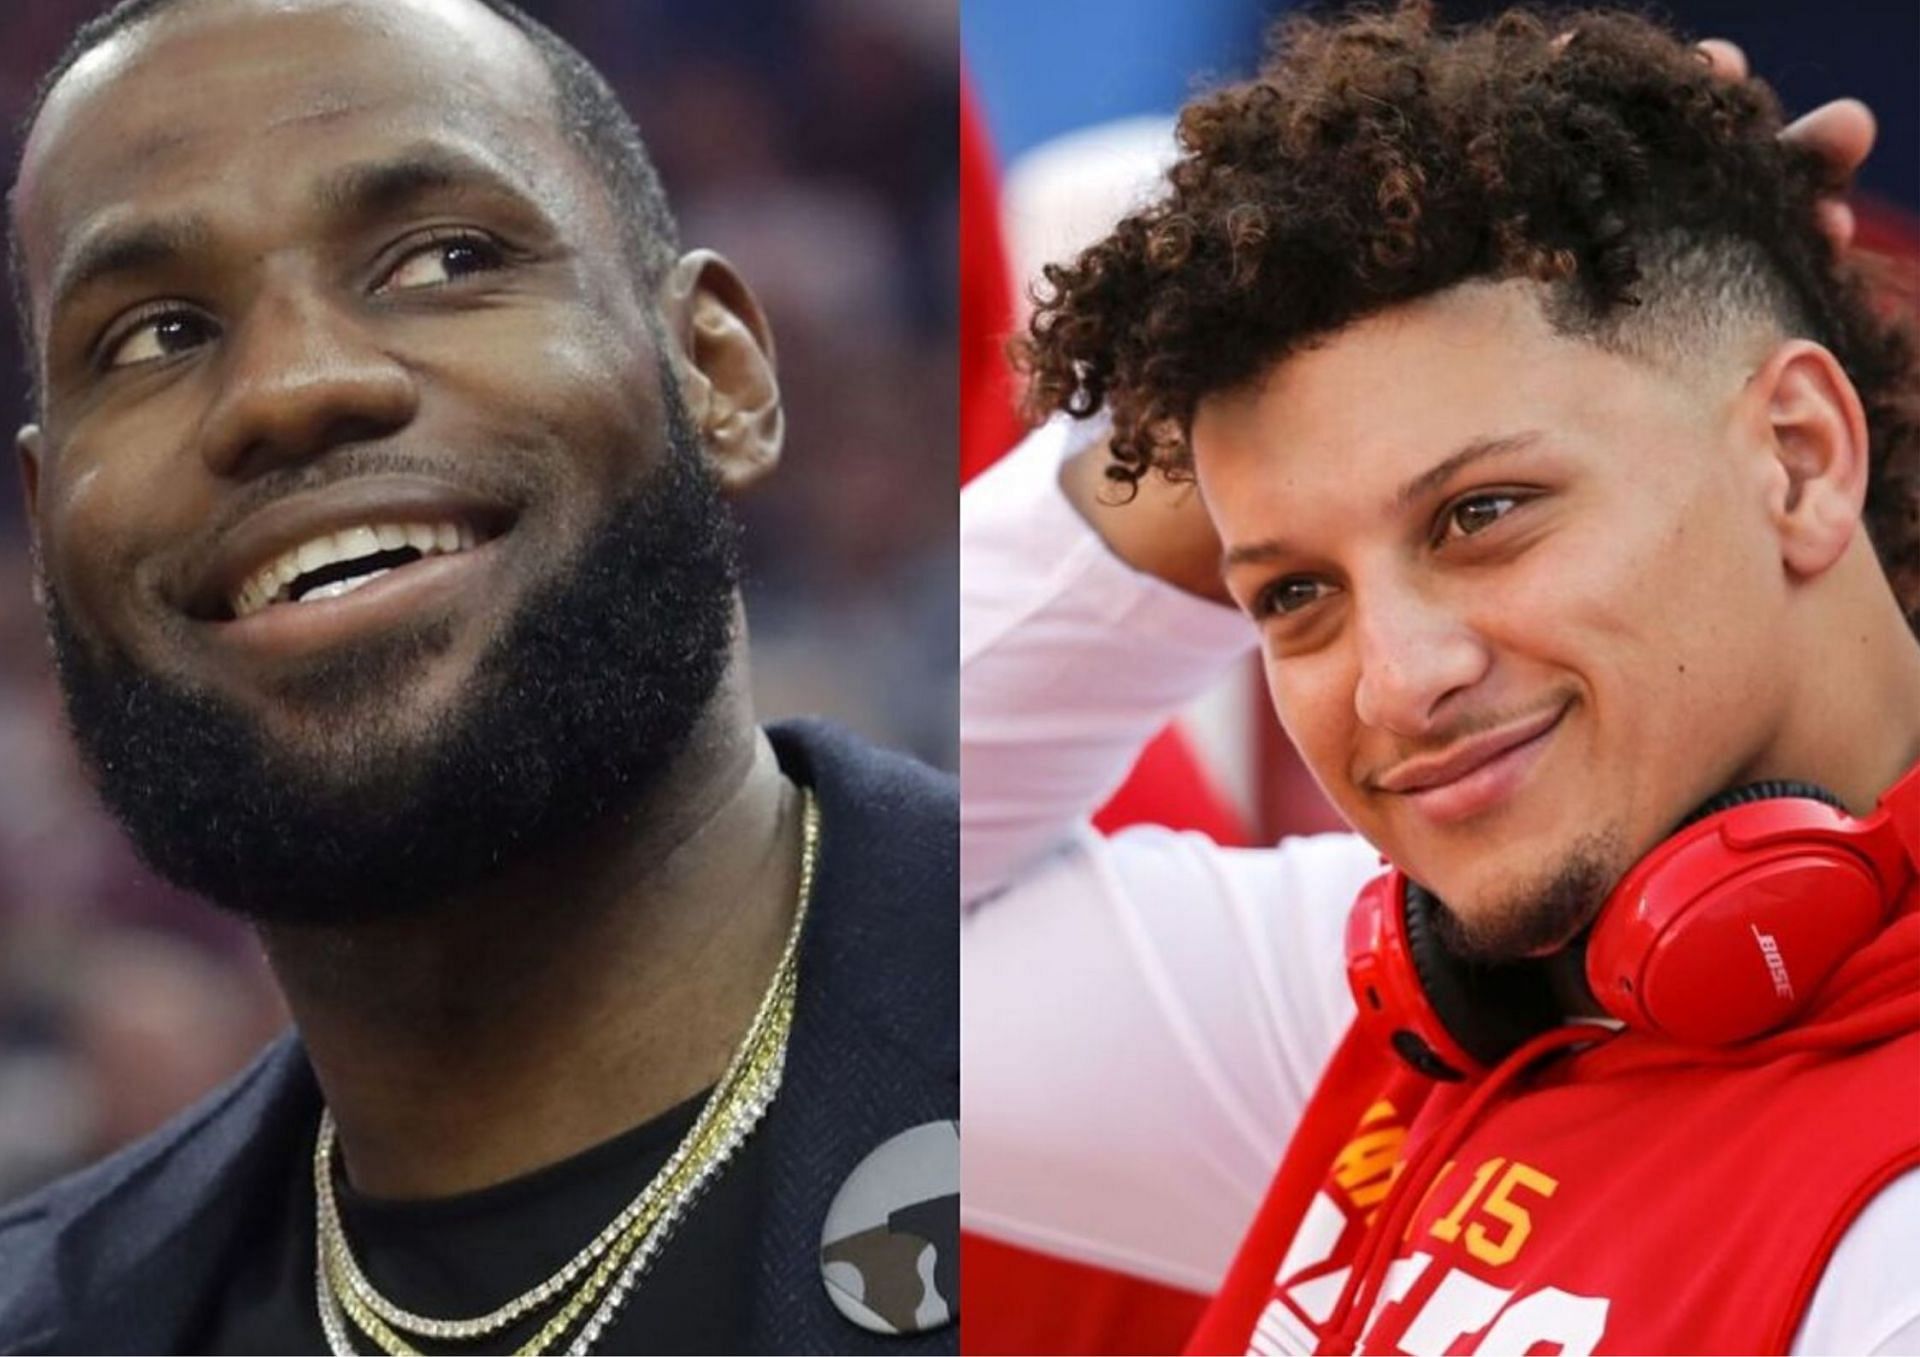 LeBron James and Patrick Mahomes are two of the most popular American sports athletes. [photo: MARCA]